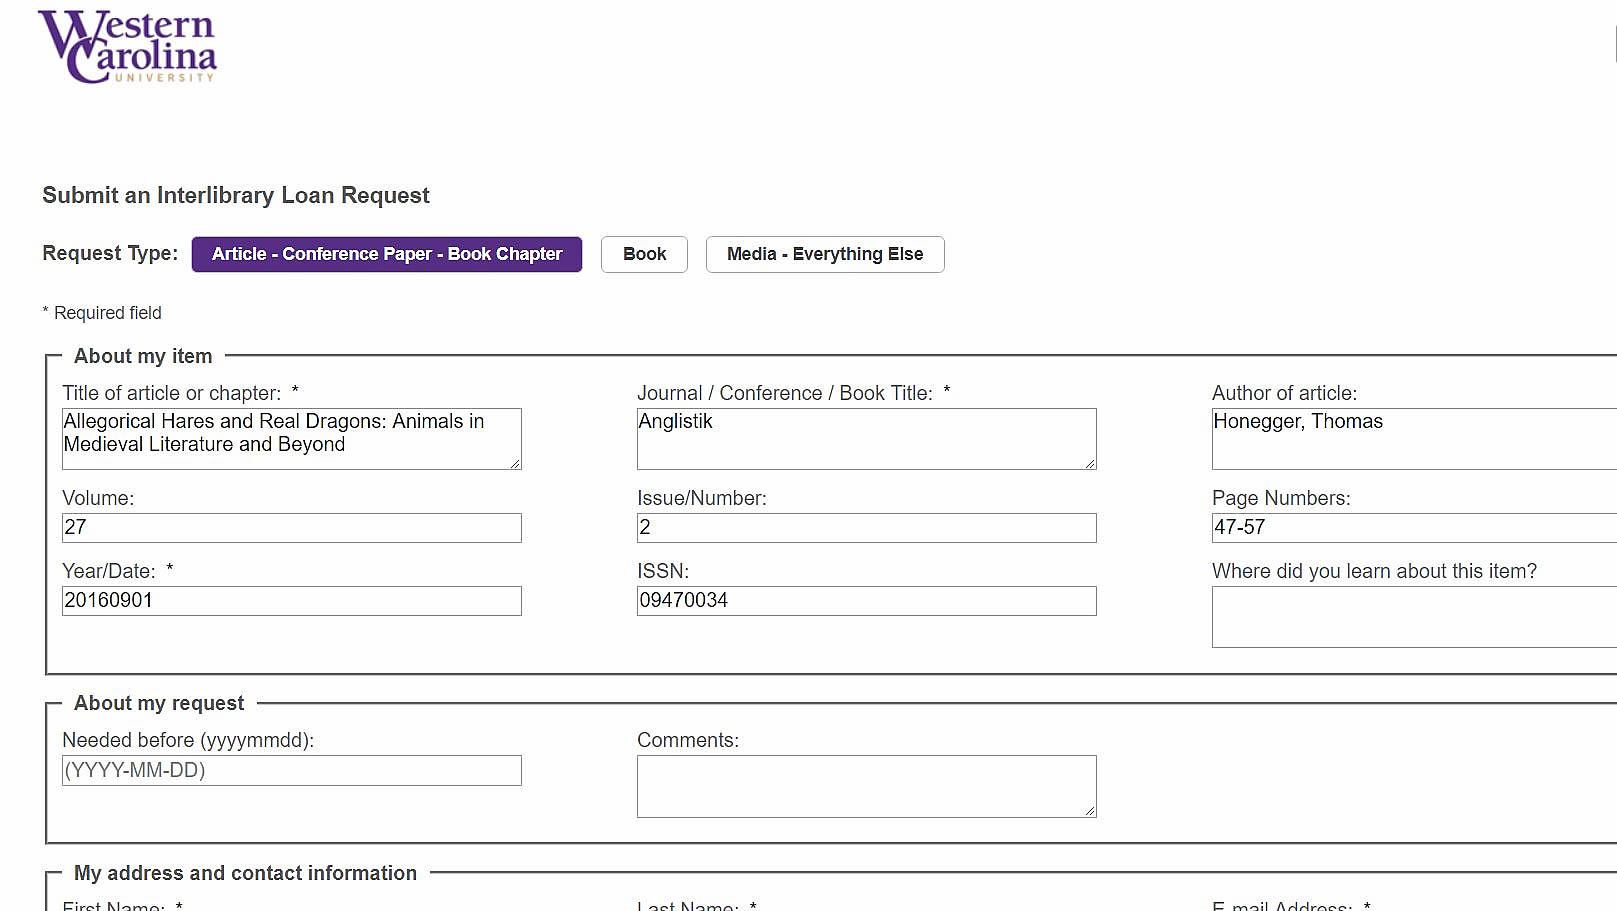 Image of Interlibrary Loan form.